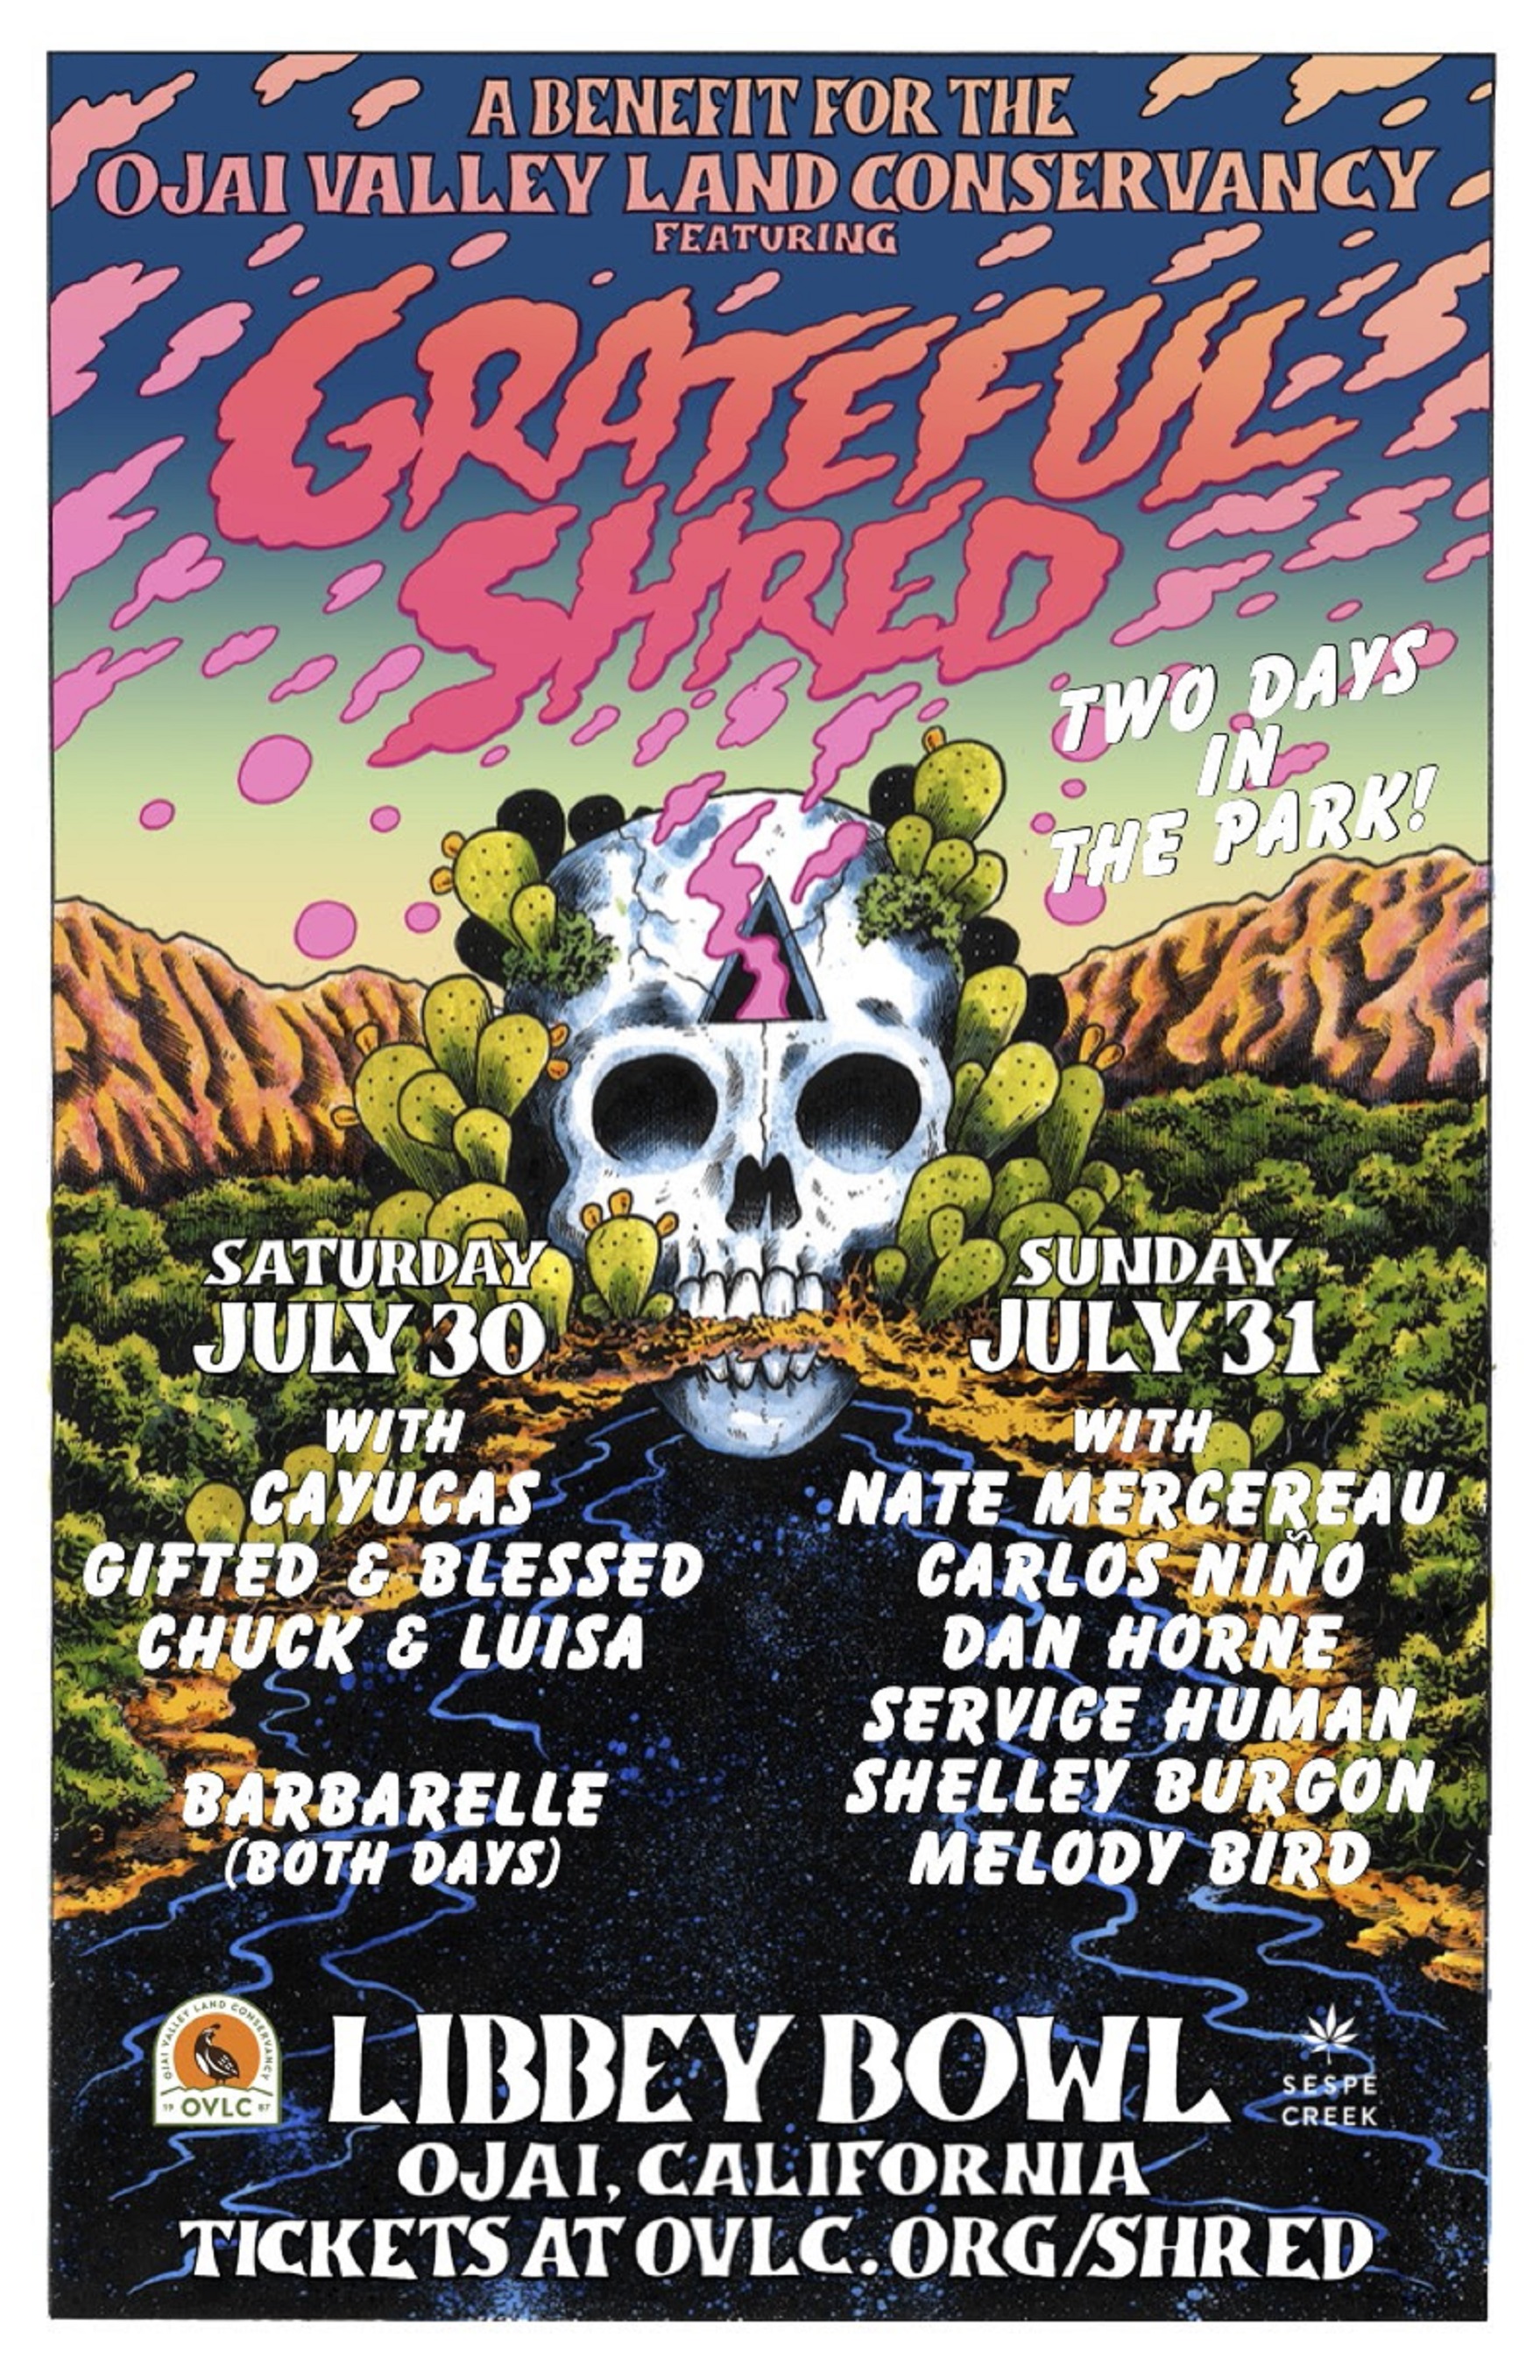 Ojai Valley Land Conservancy Benefit Concert Featuring Grateful Shred